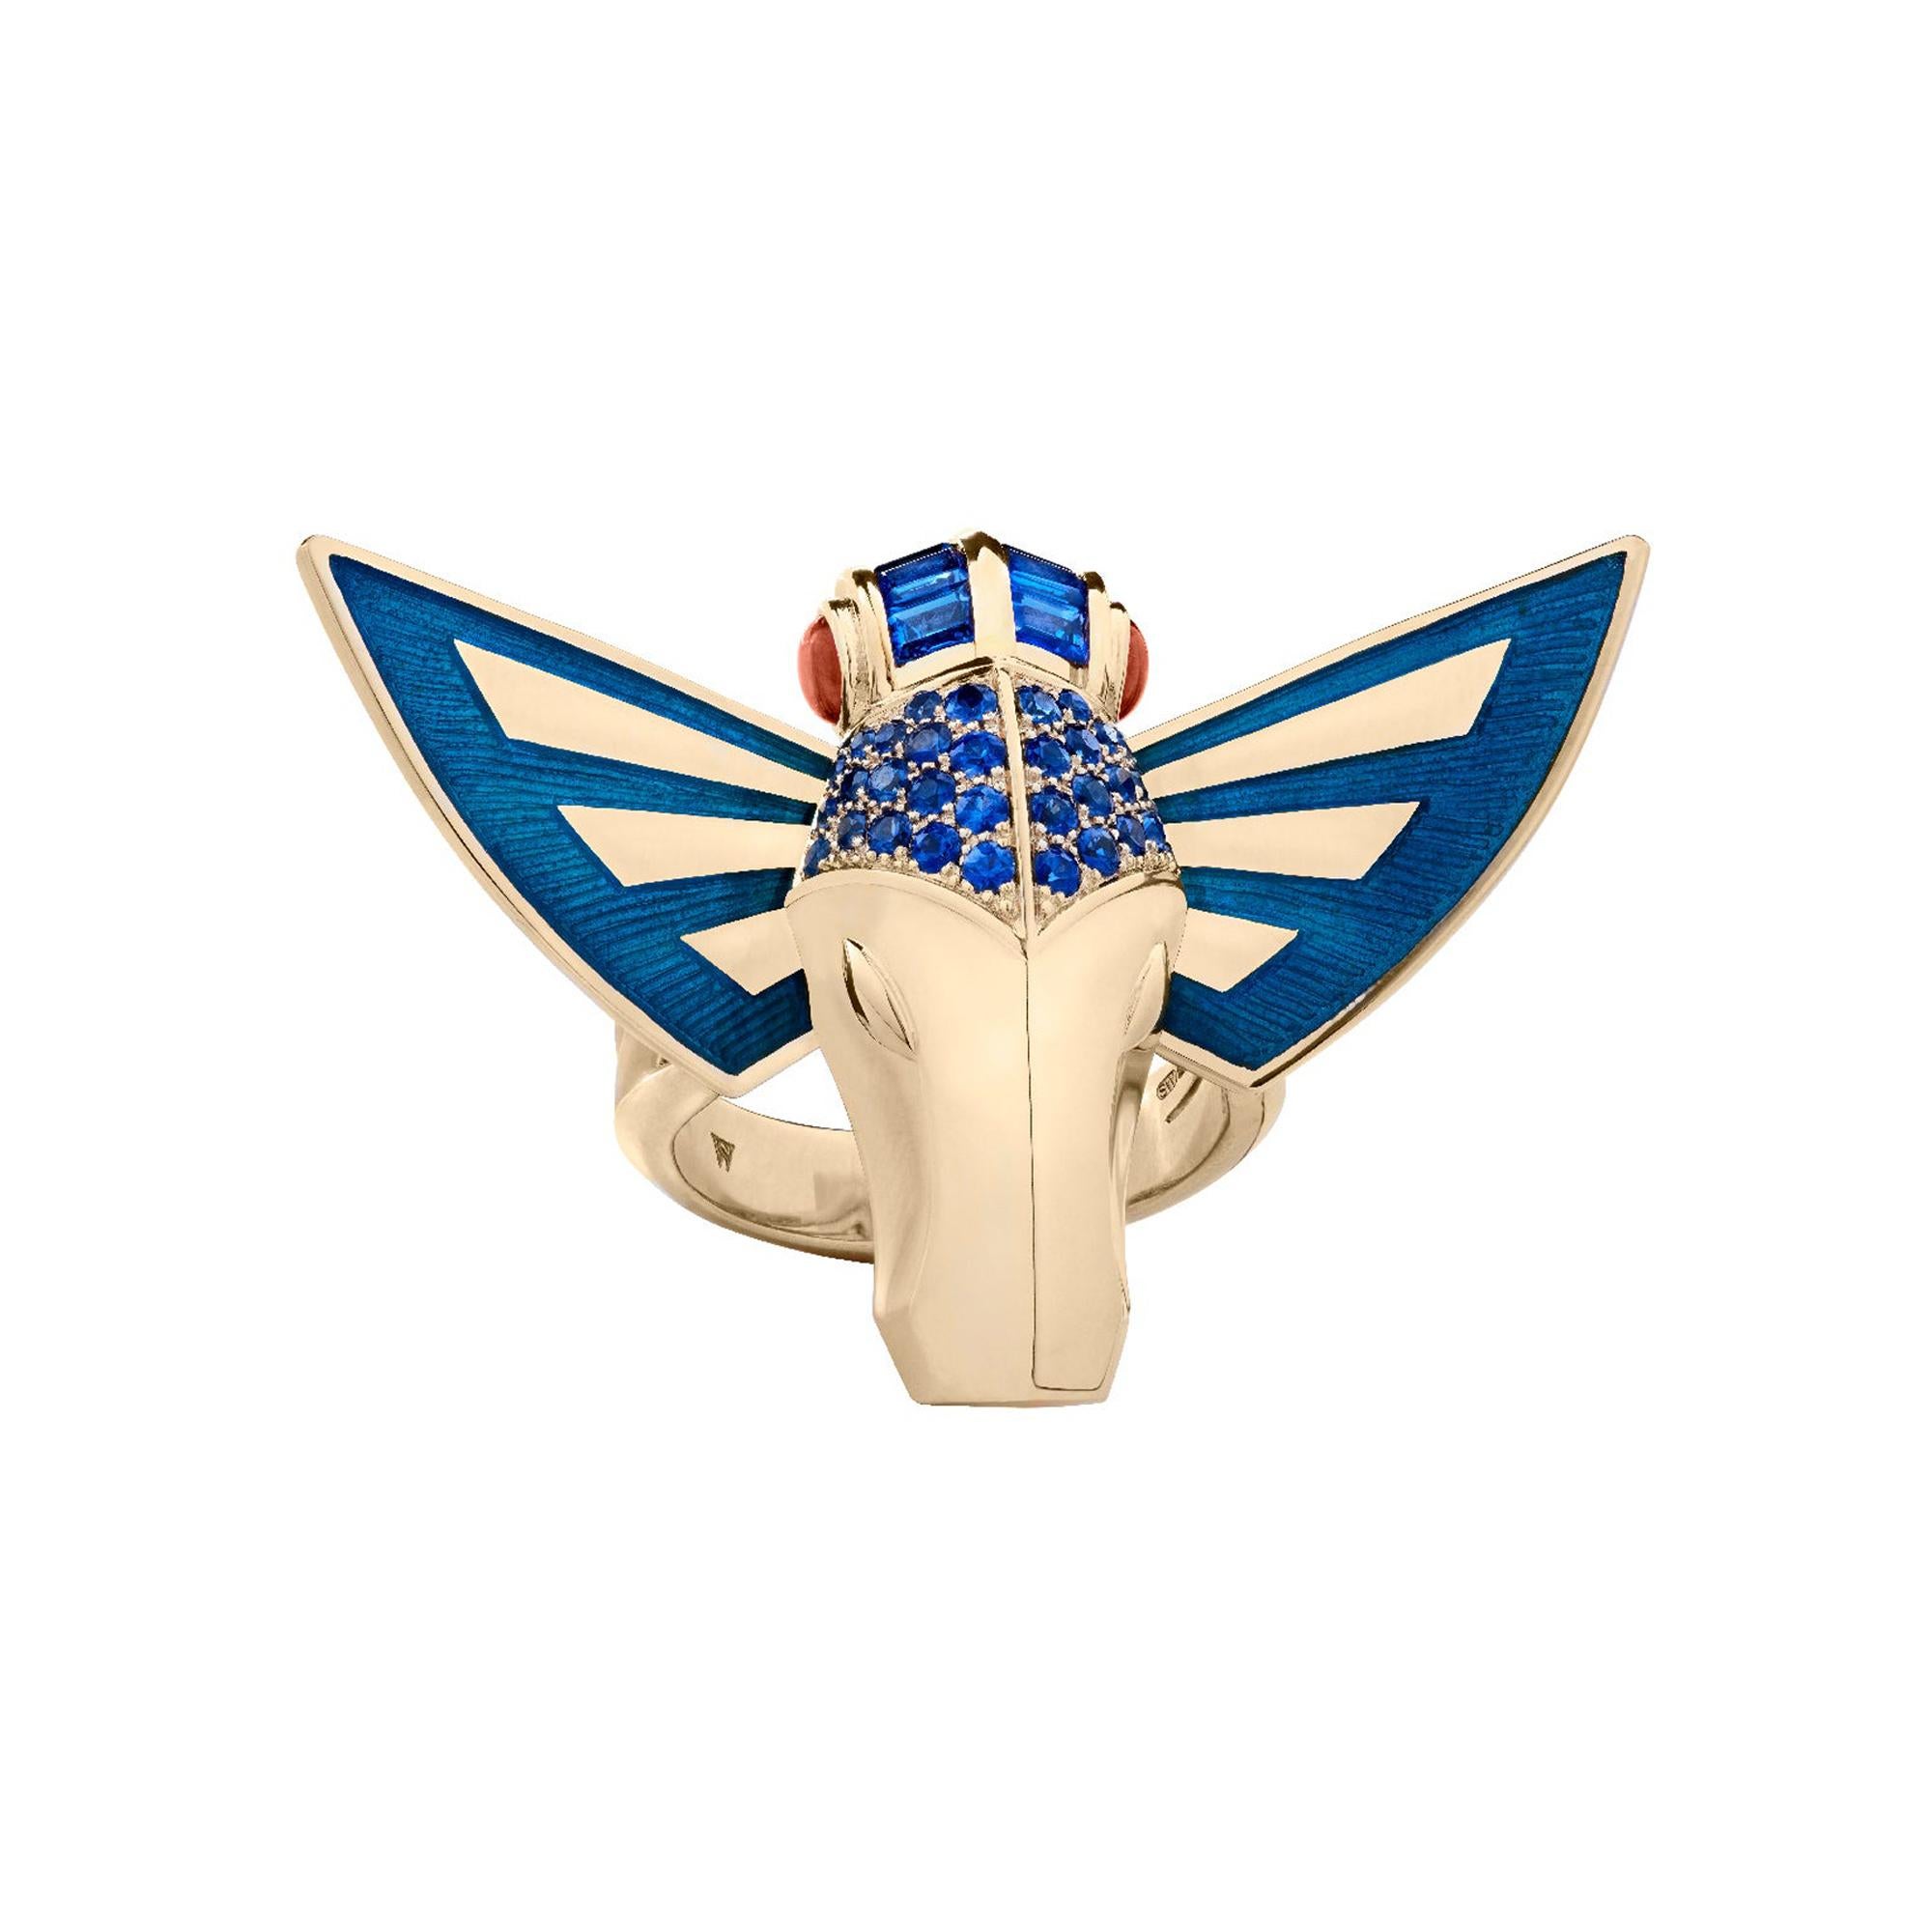 Stephen Webster Jitterbug Horse Fly 18 Carat Gold with Blue Enamel Wings Ring